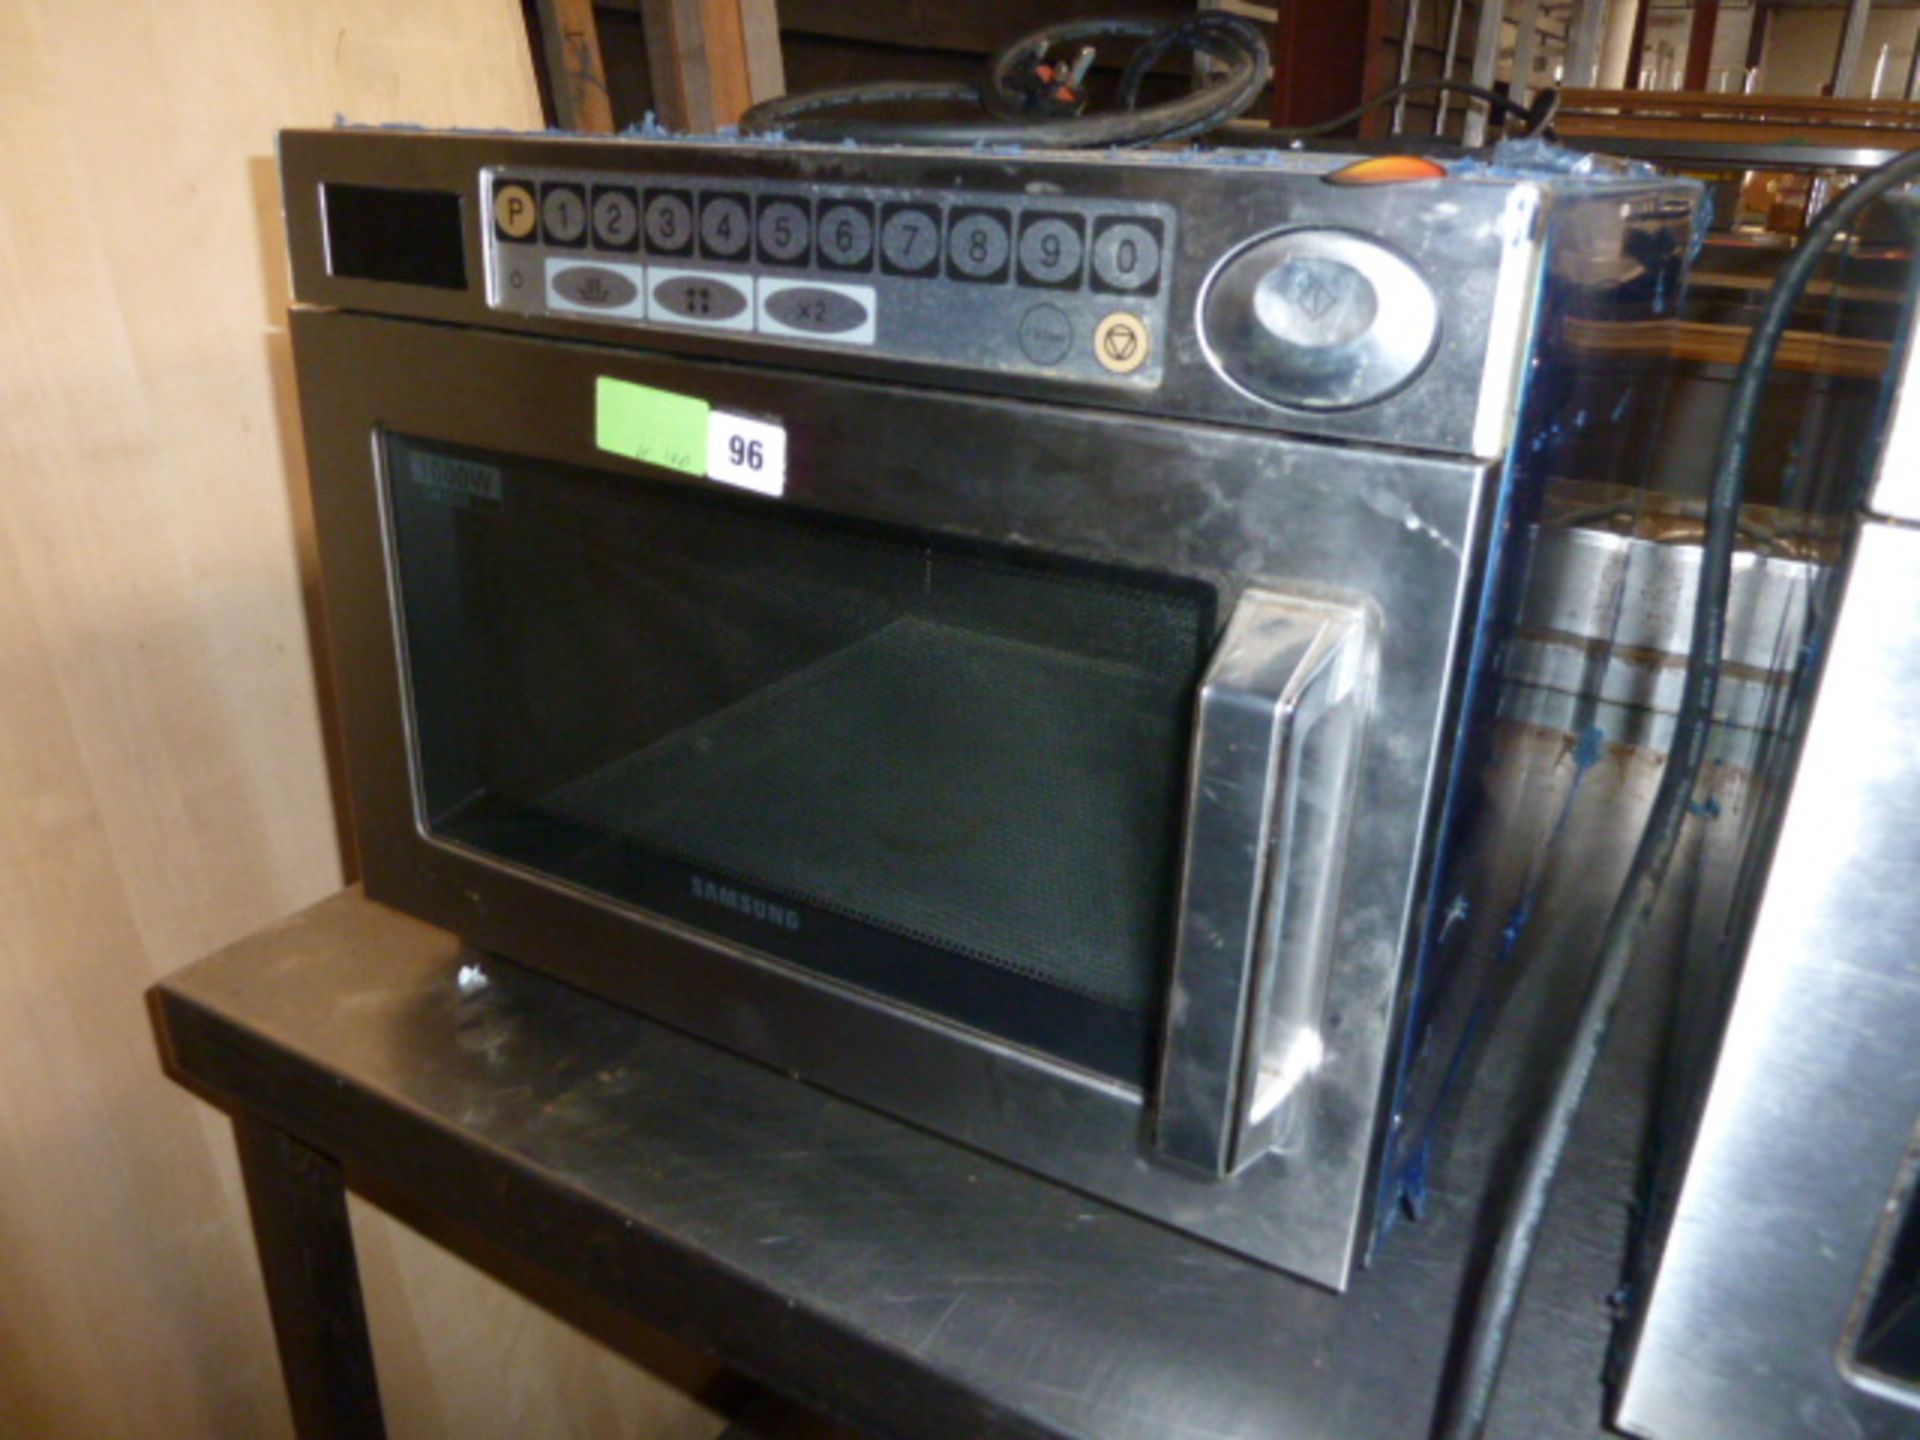 46cm Samsung CM1029 1000w commercial microwave oven